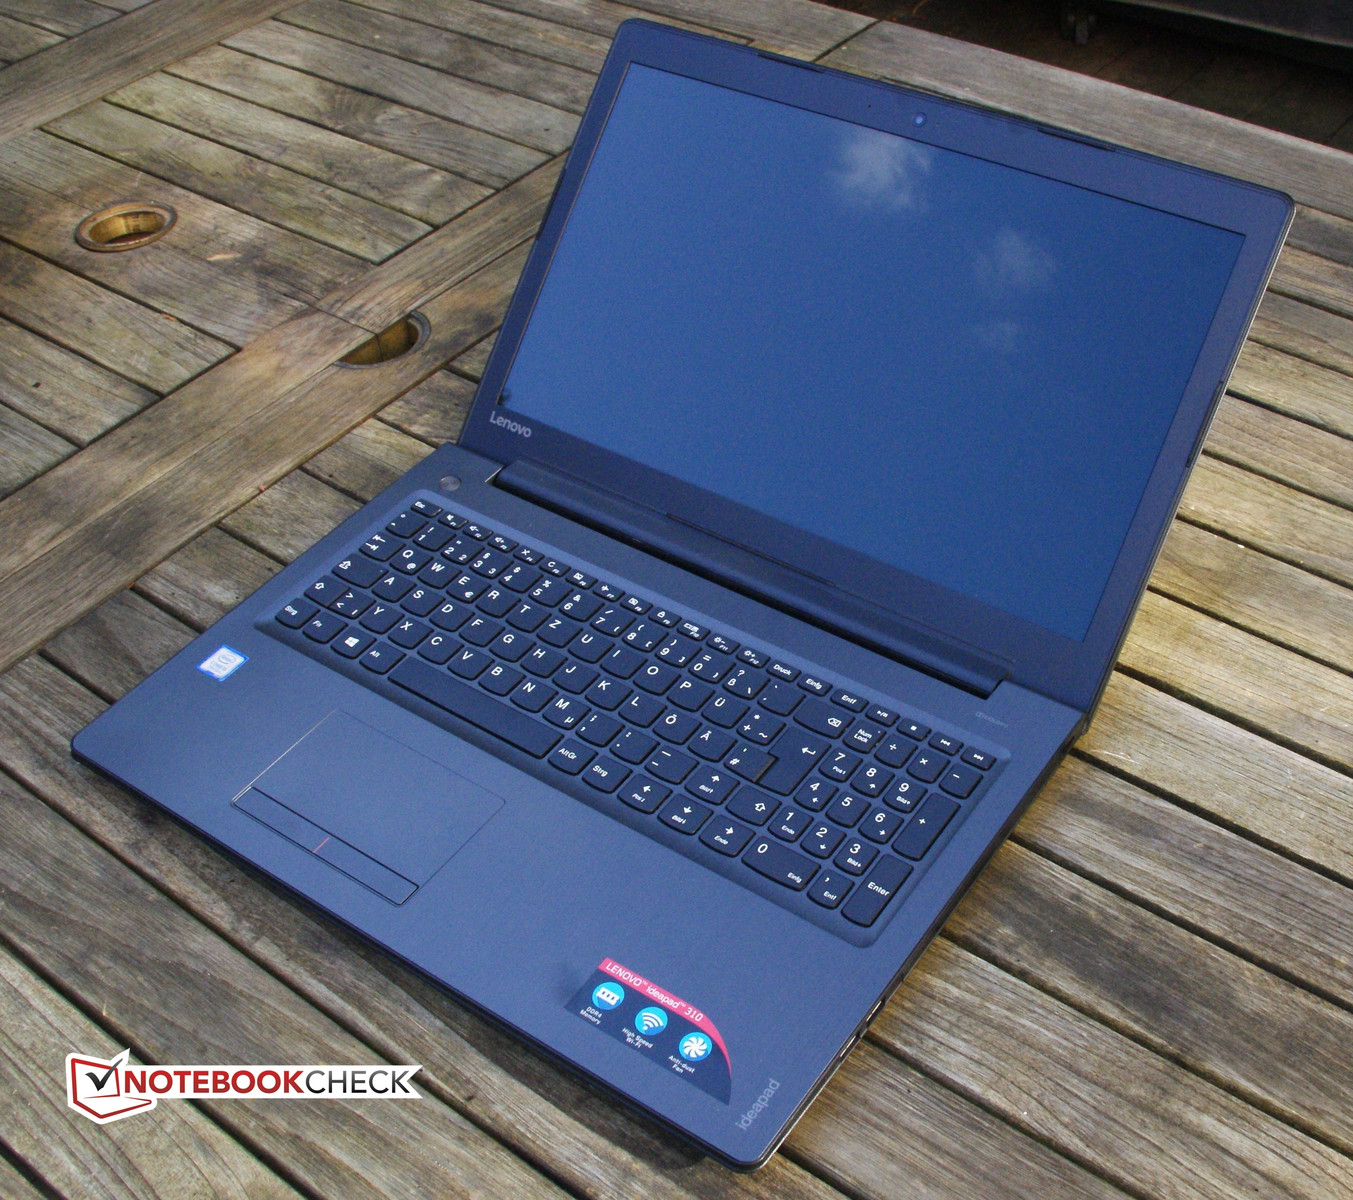 Is Lenovo Ideapad 310 the best yet from Lenovo?